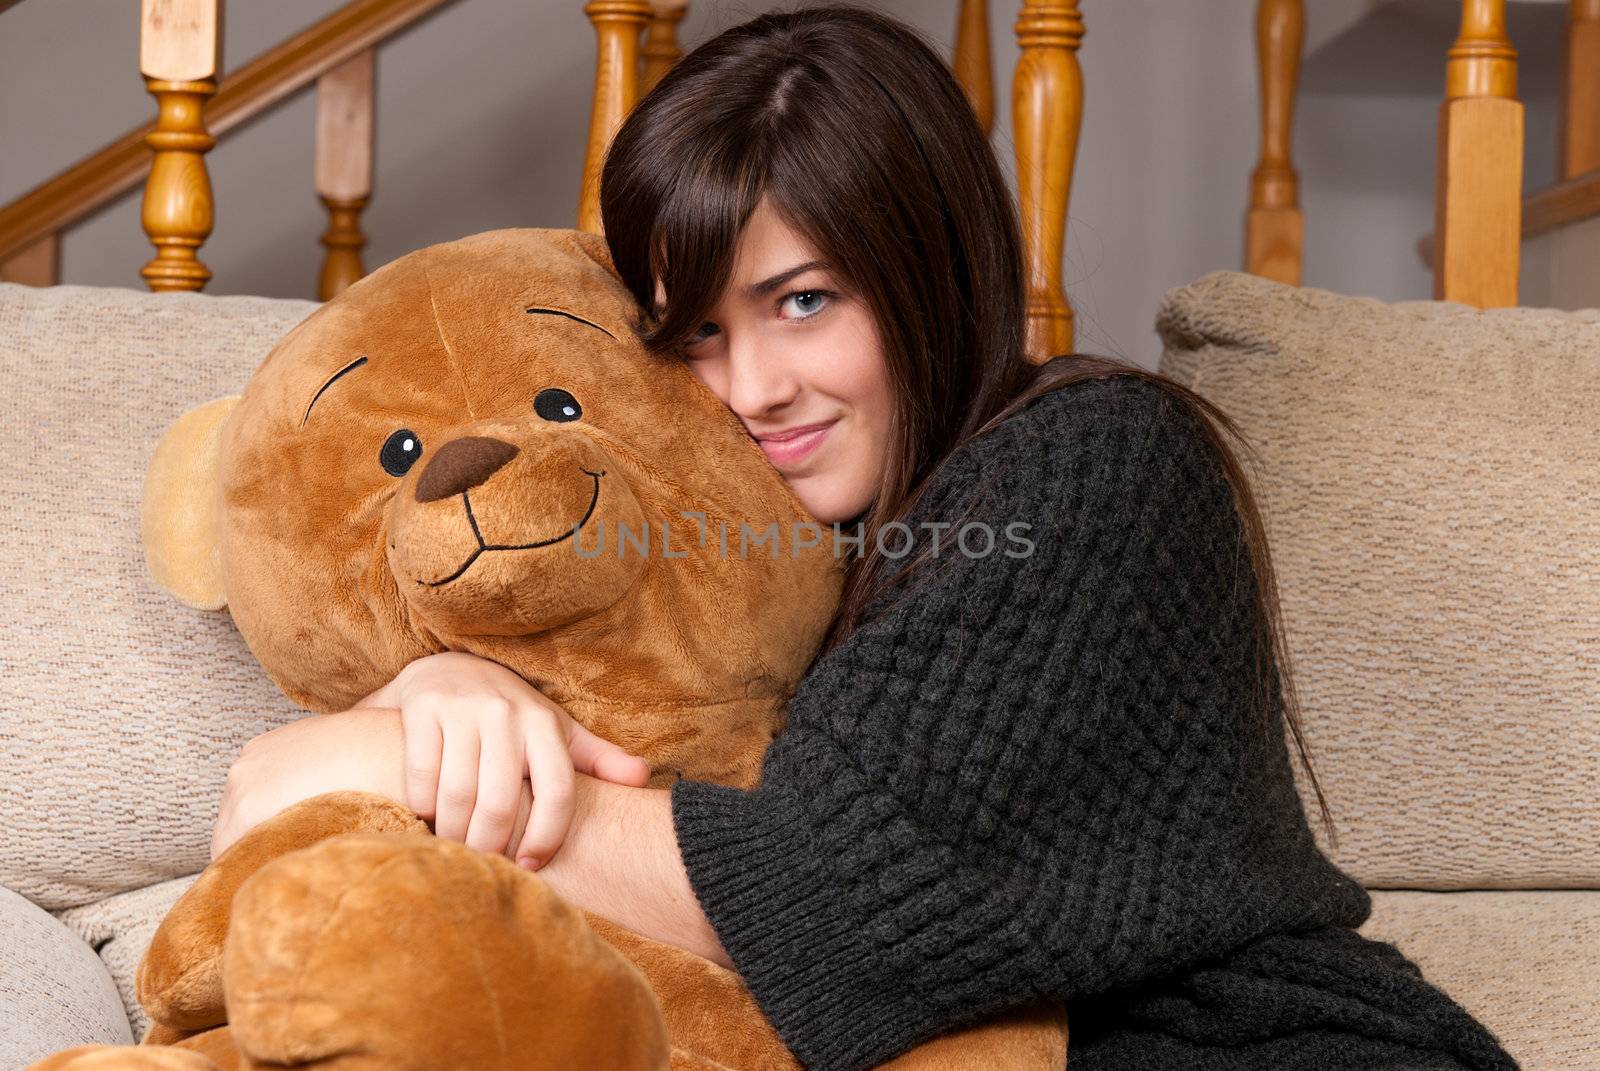 Young woman embracing teddy bear sitting on sofa close-up by dgmata